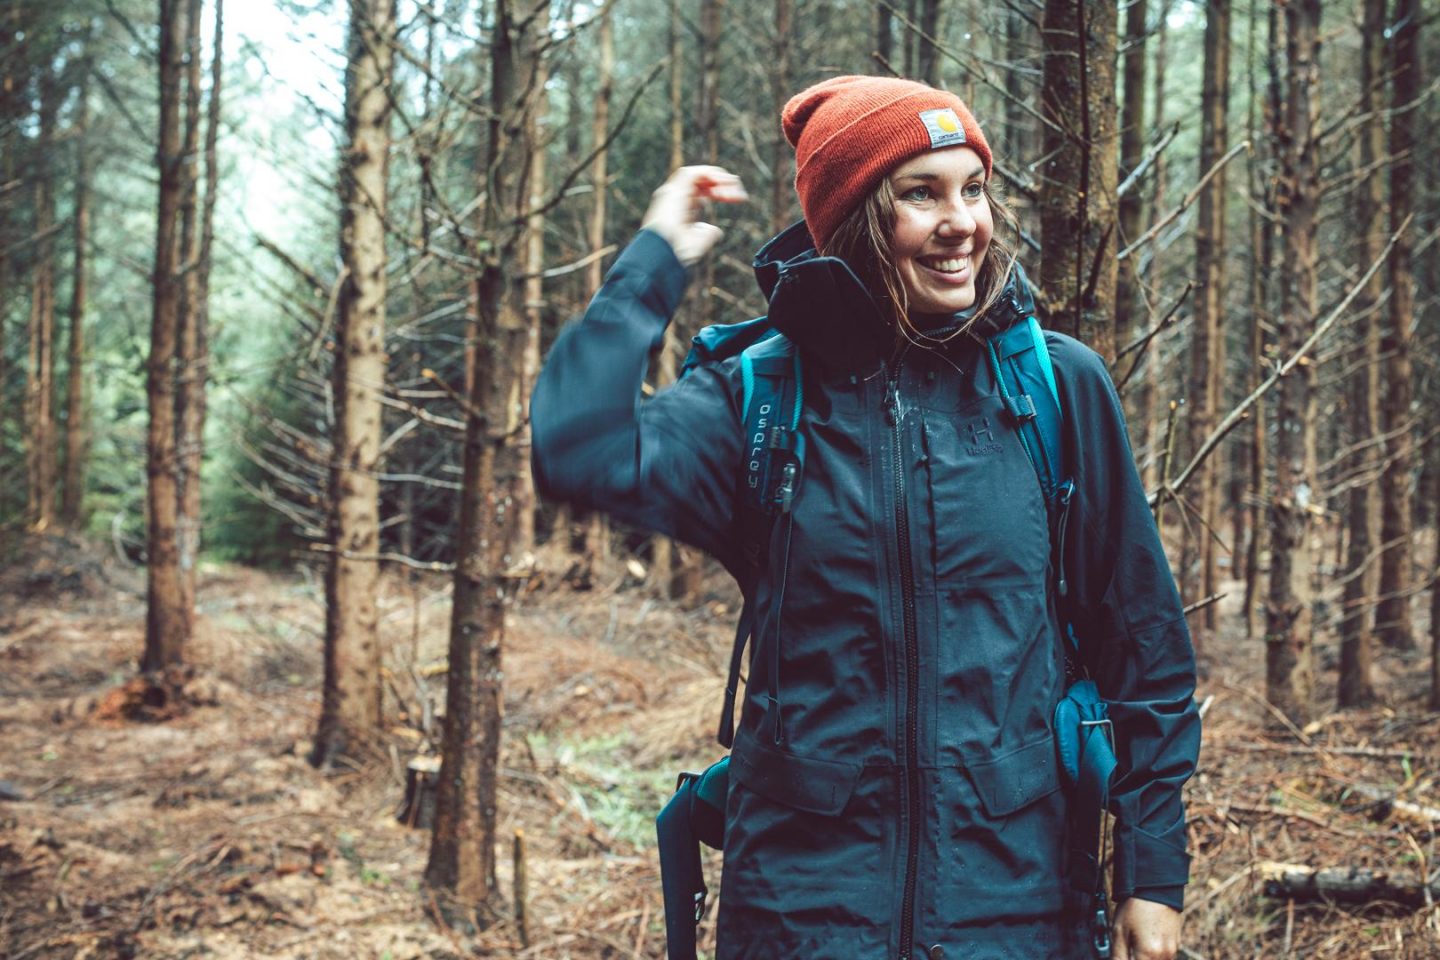 How to look after outdoor kit: cleaning, maintenance and repair Sian Lewis 